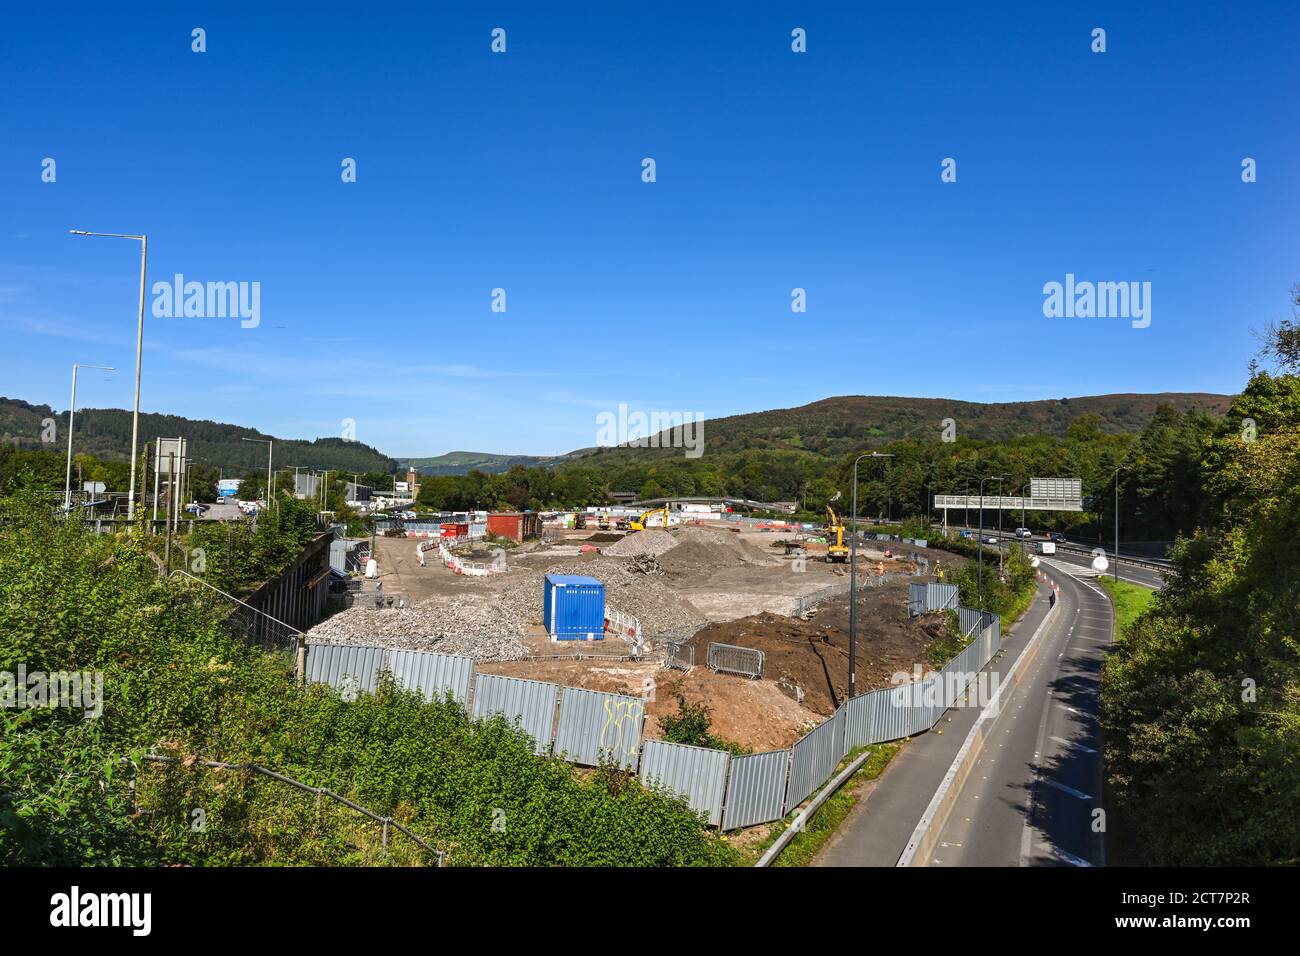 Taffs Well, near Cardiff, Wales - September 2020: Construction site in Taffs Well near Cardiff. It is the site for a new train depot. Stock Photo